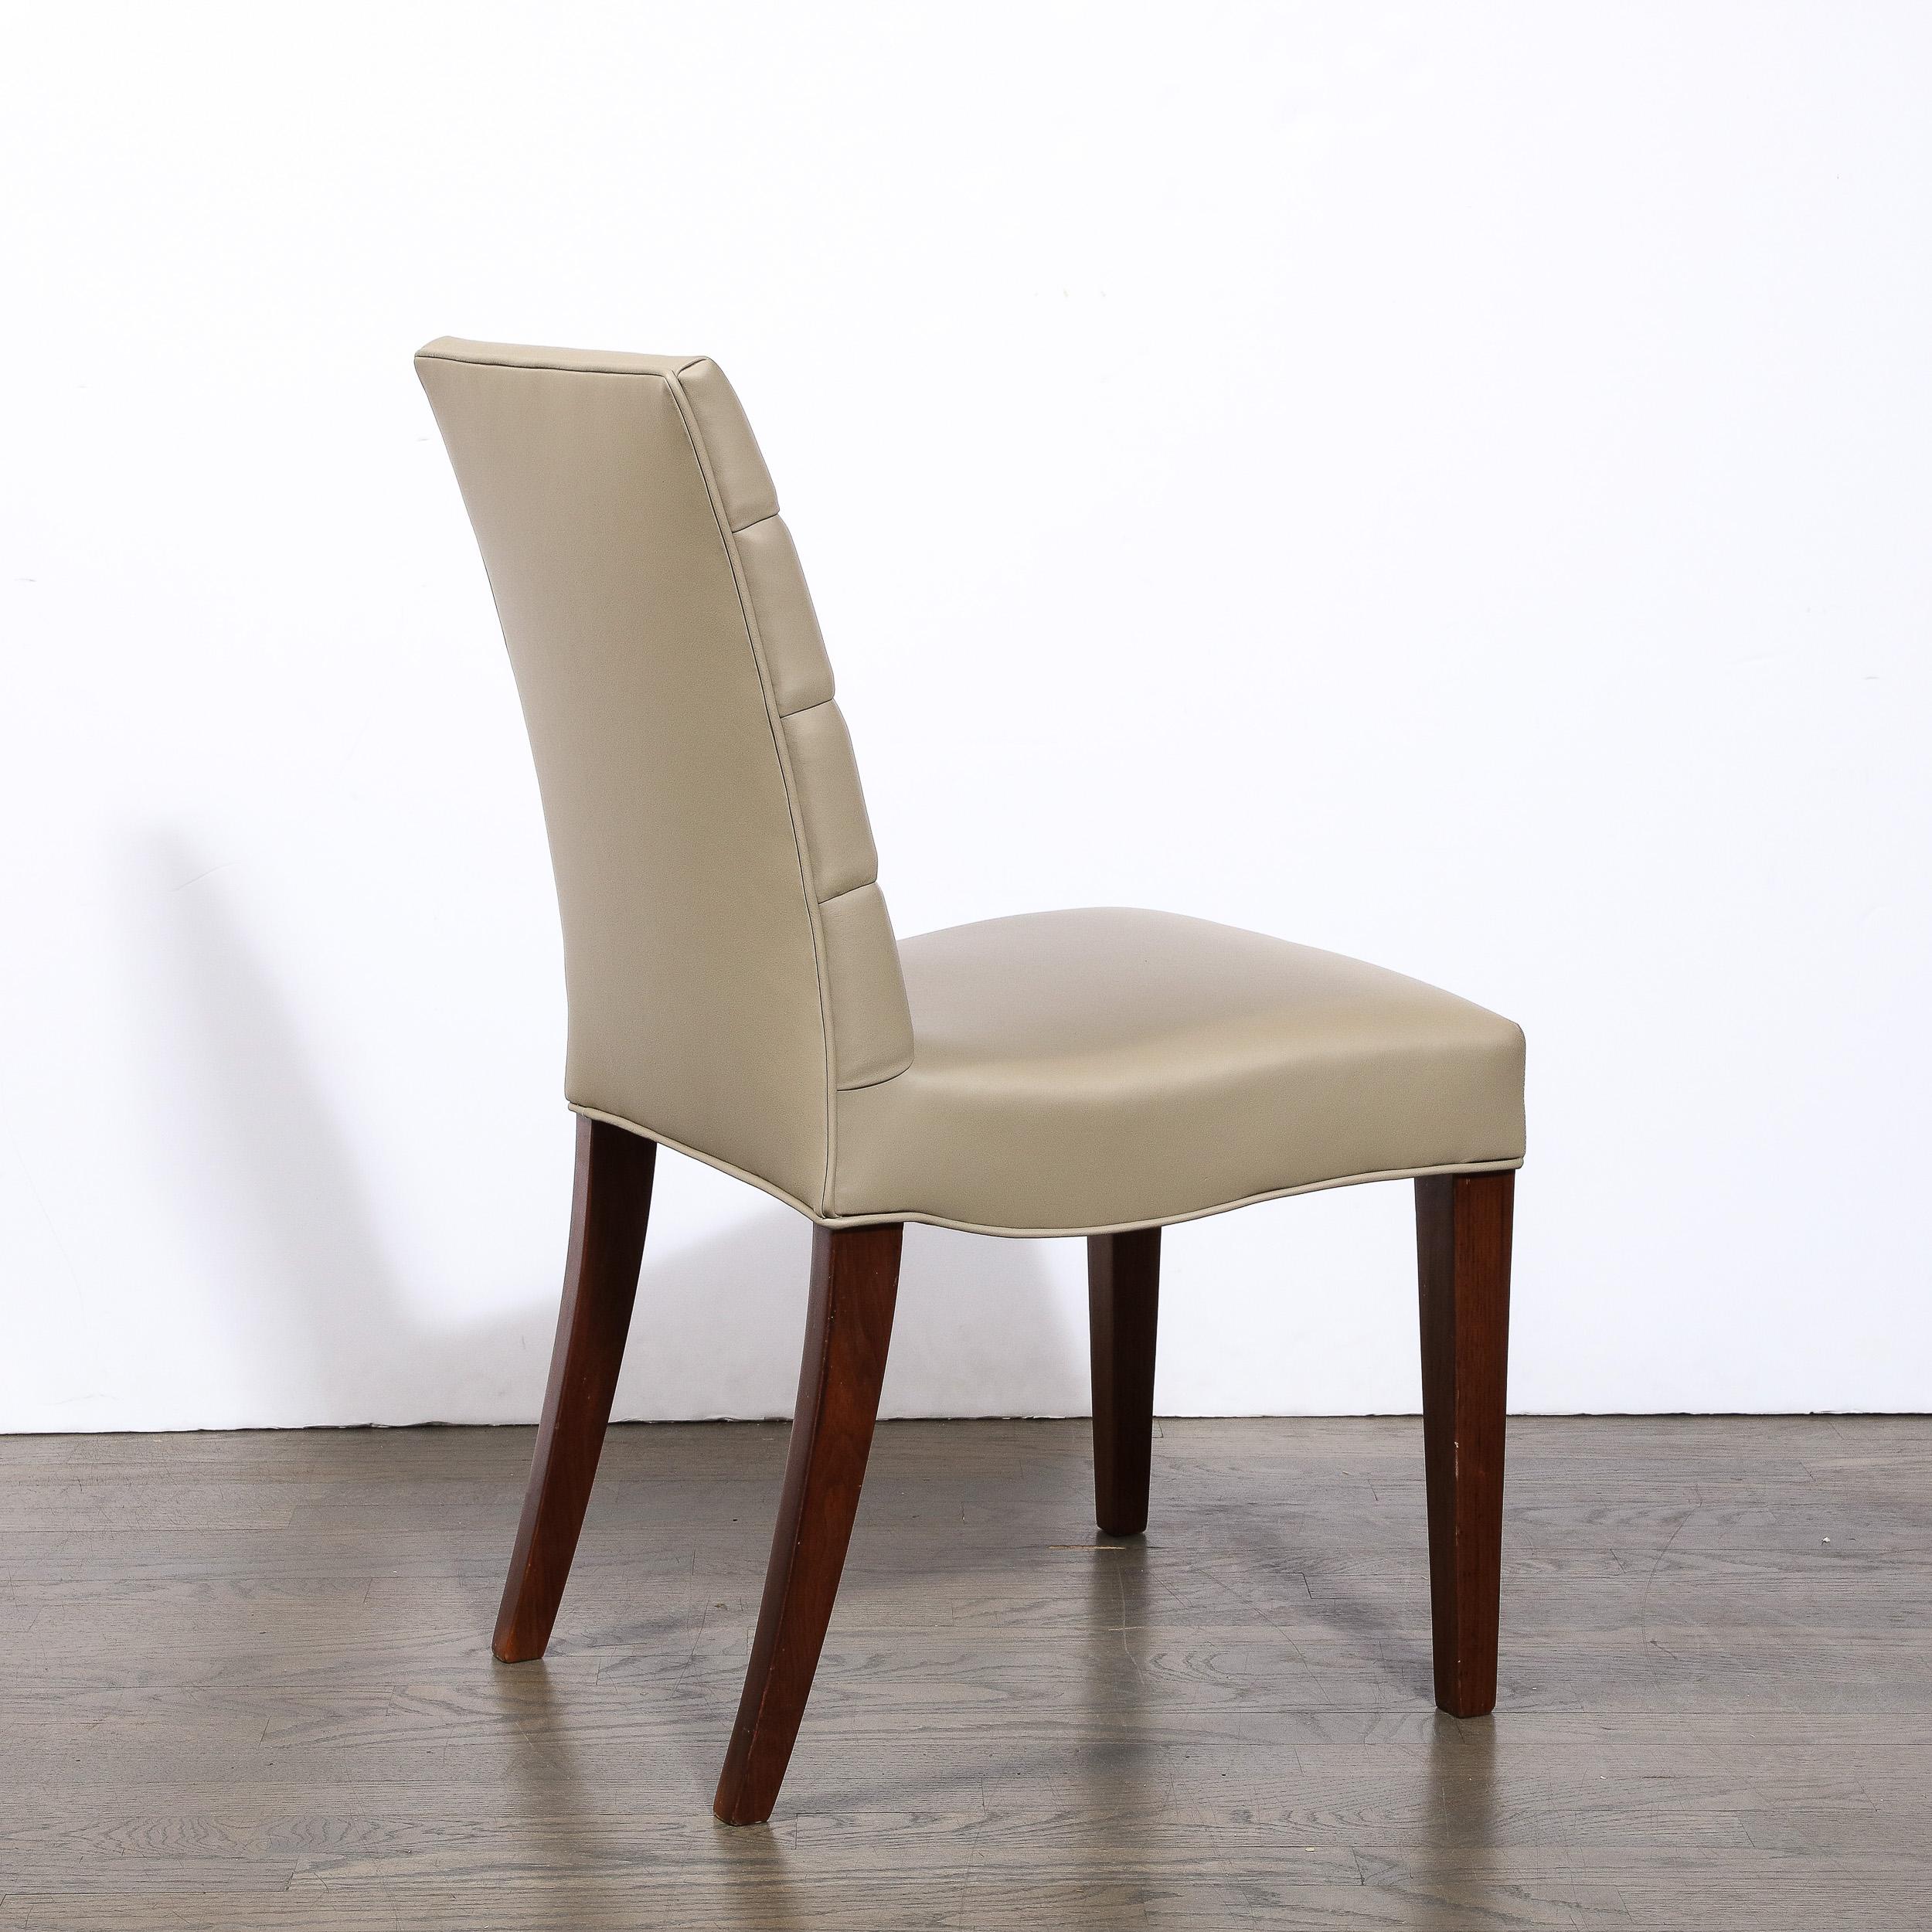 Art Deco Gilbert Rohde Chair in Holly Hunt Leather w/ Tufted Back & Walnut Legs For Sale 4